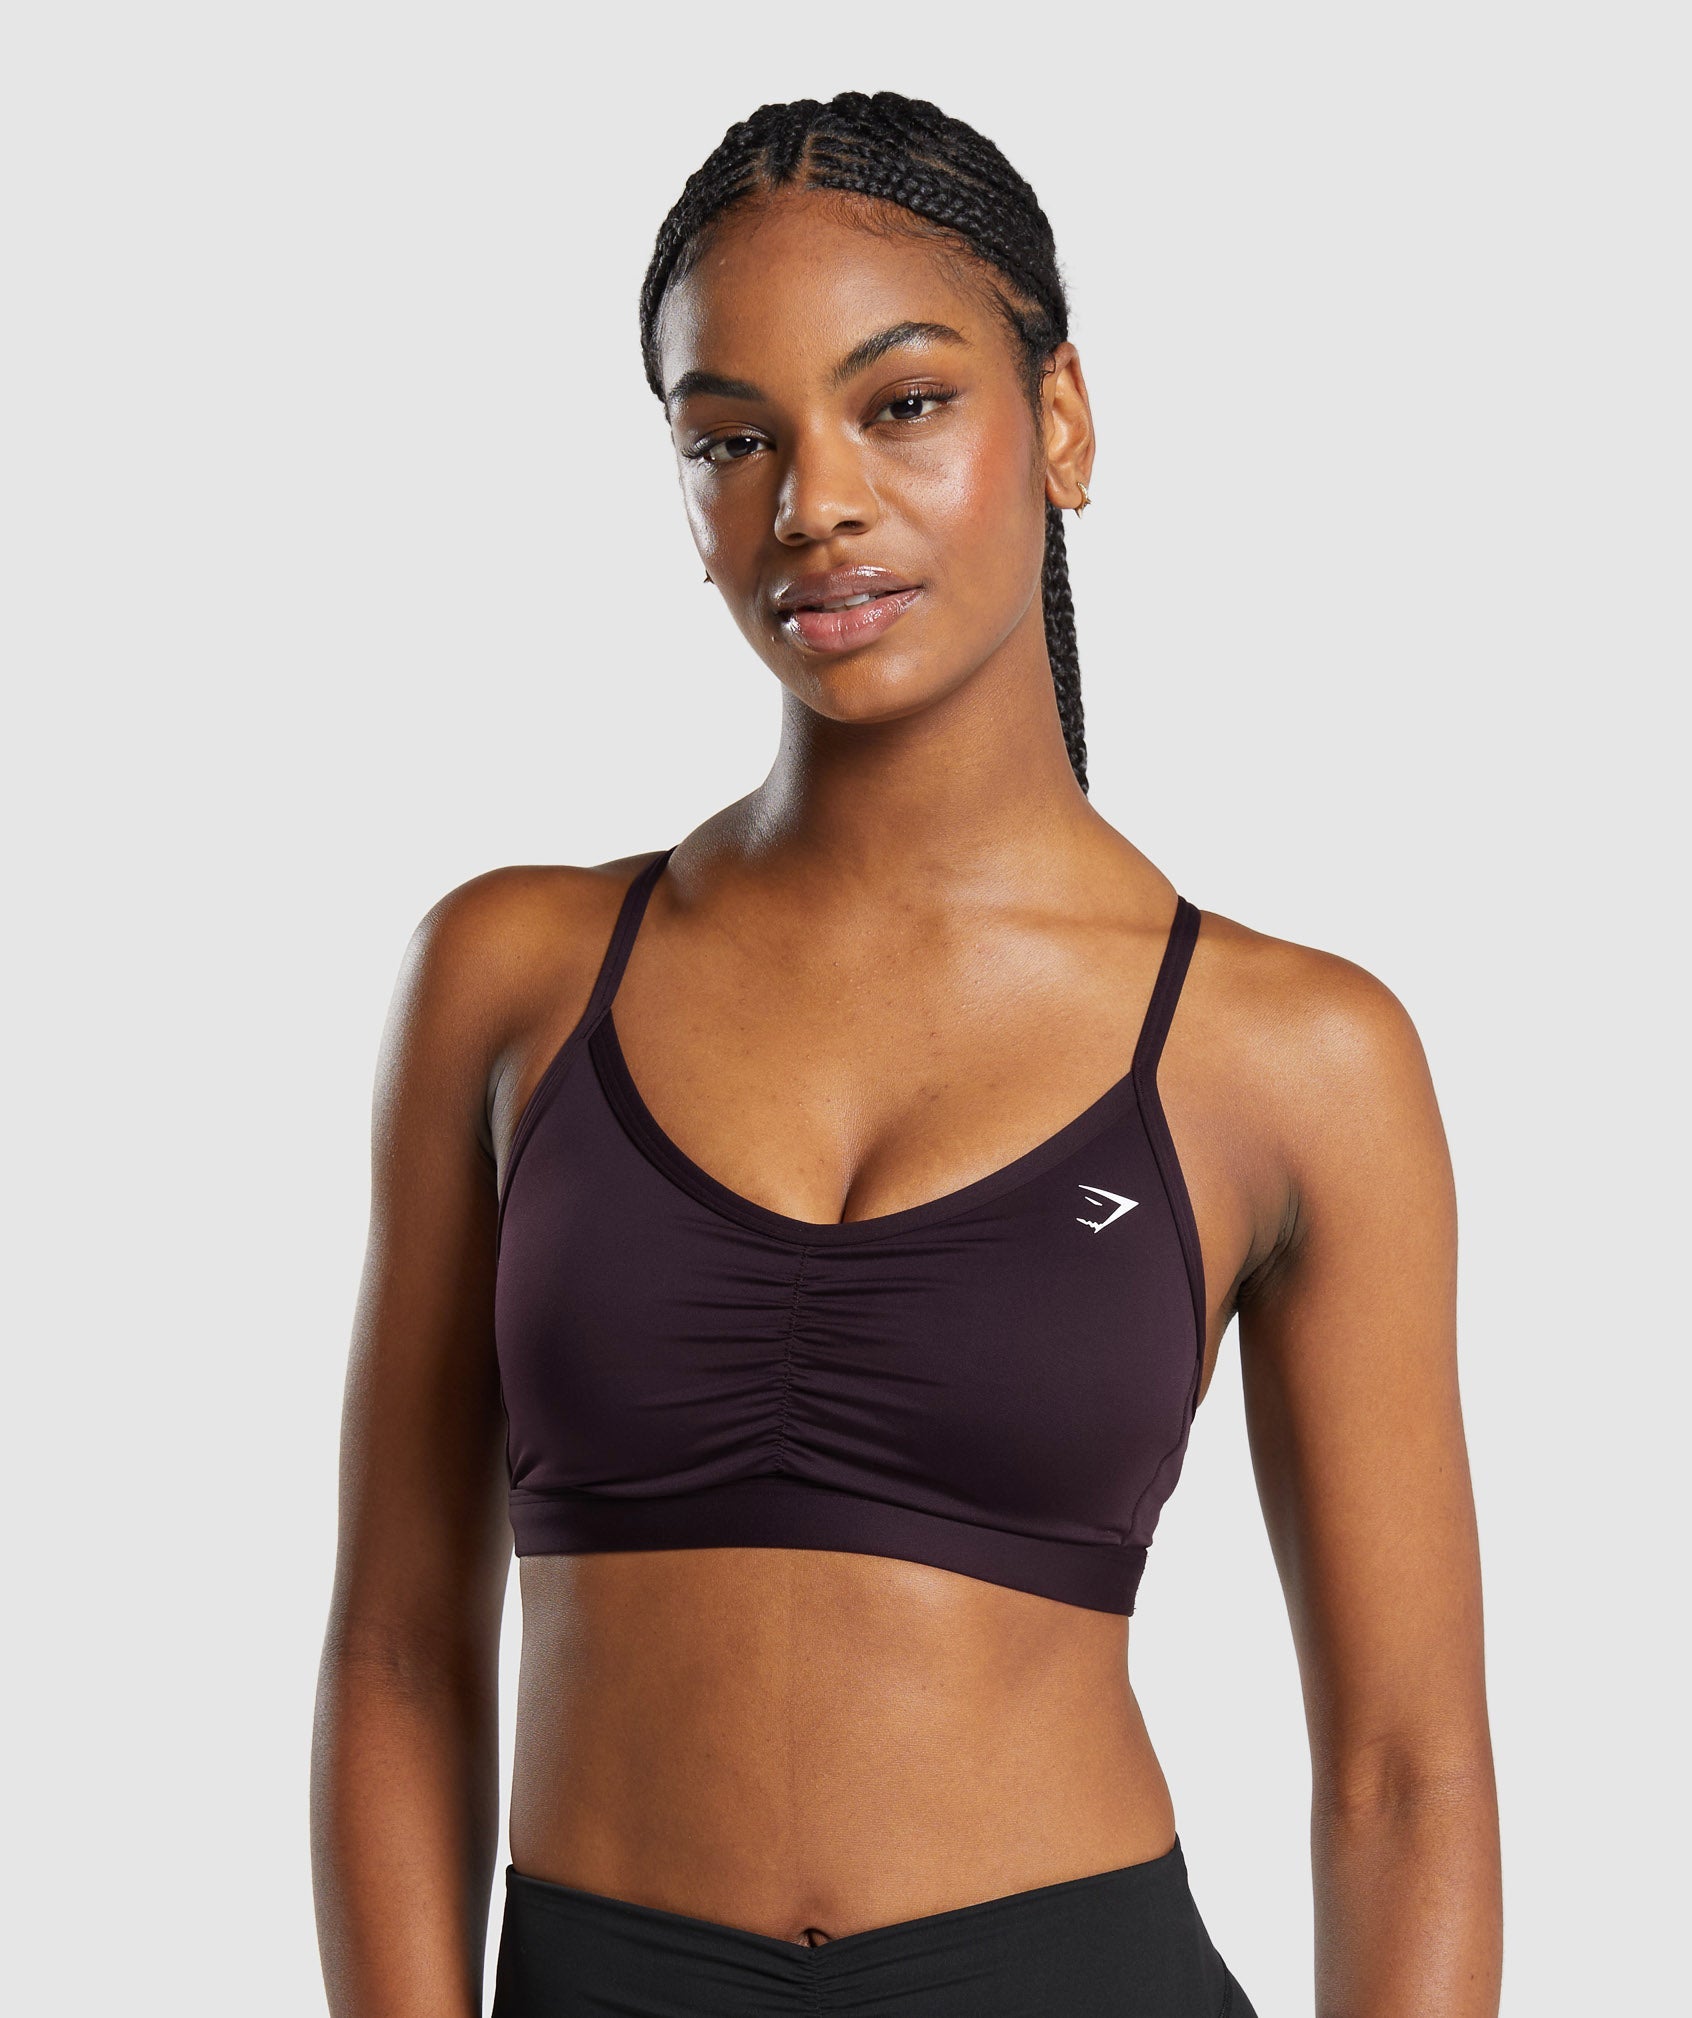 Gymshark New Ruched Strappy Sports Bra Size Small - $30 New With Tags -  From Summer